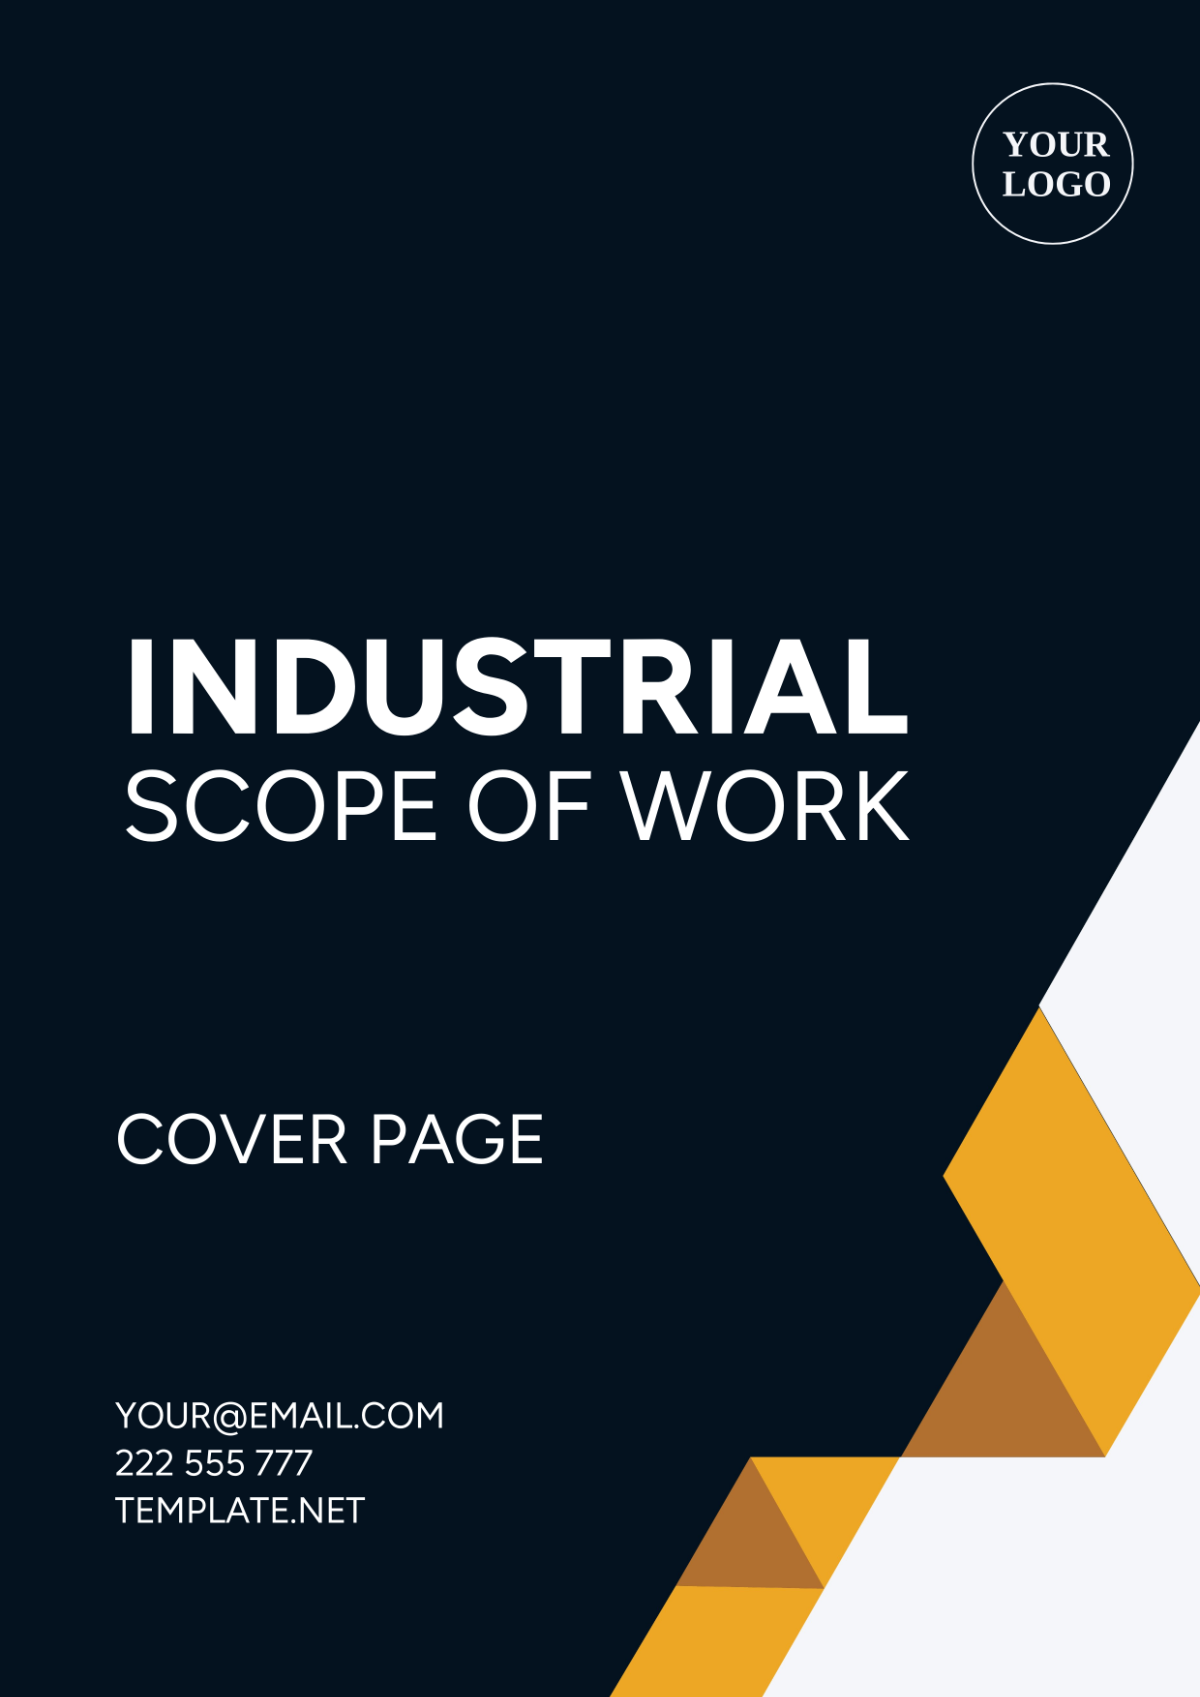 Industrial Scope of Work Cover Page Template